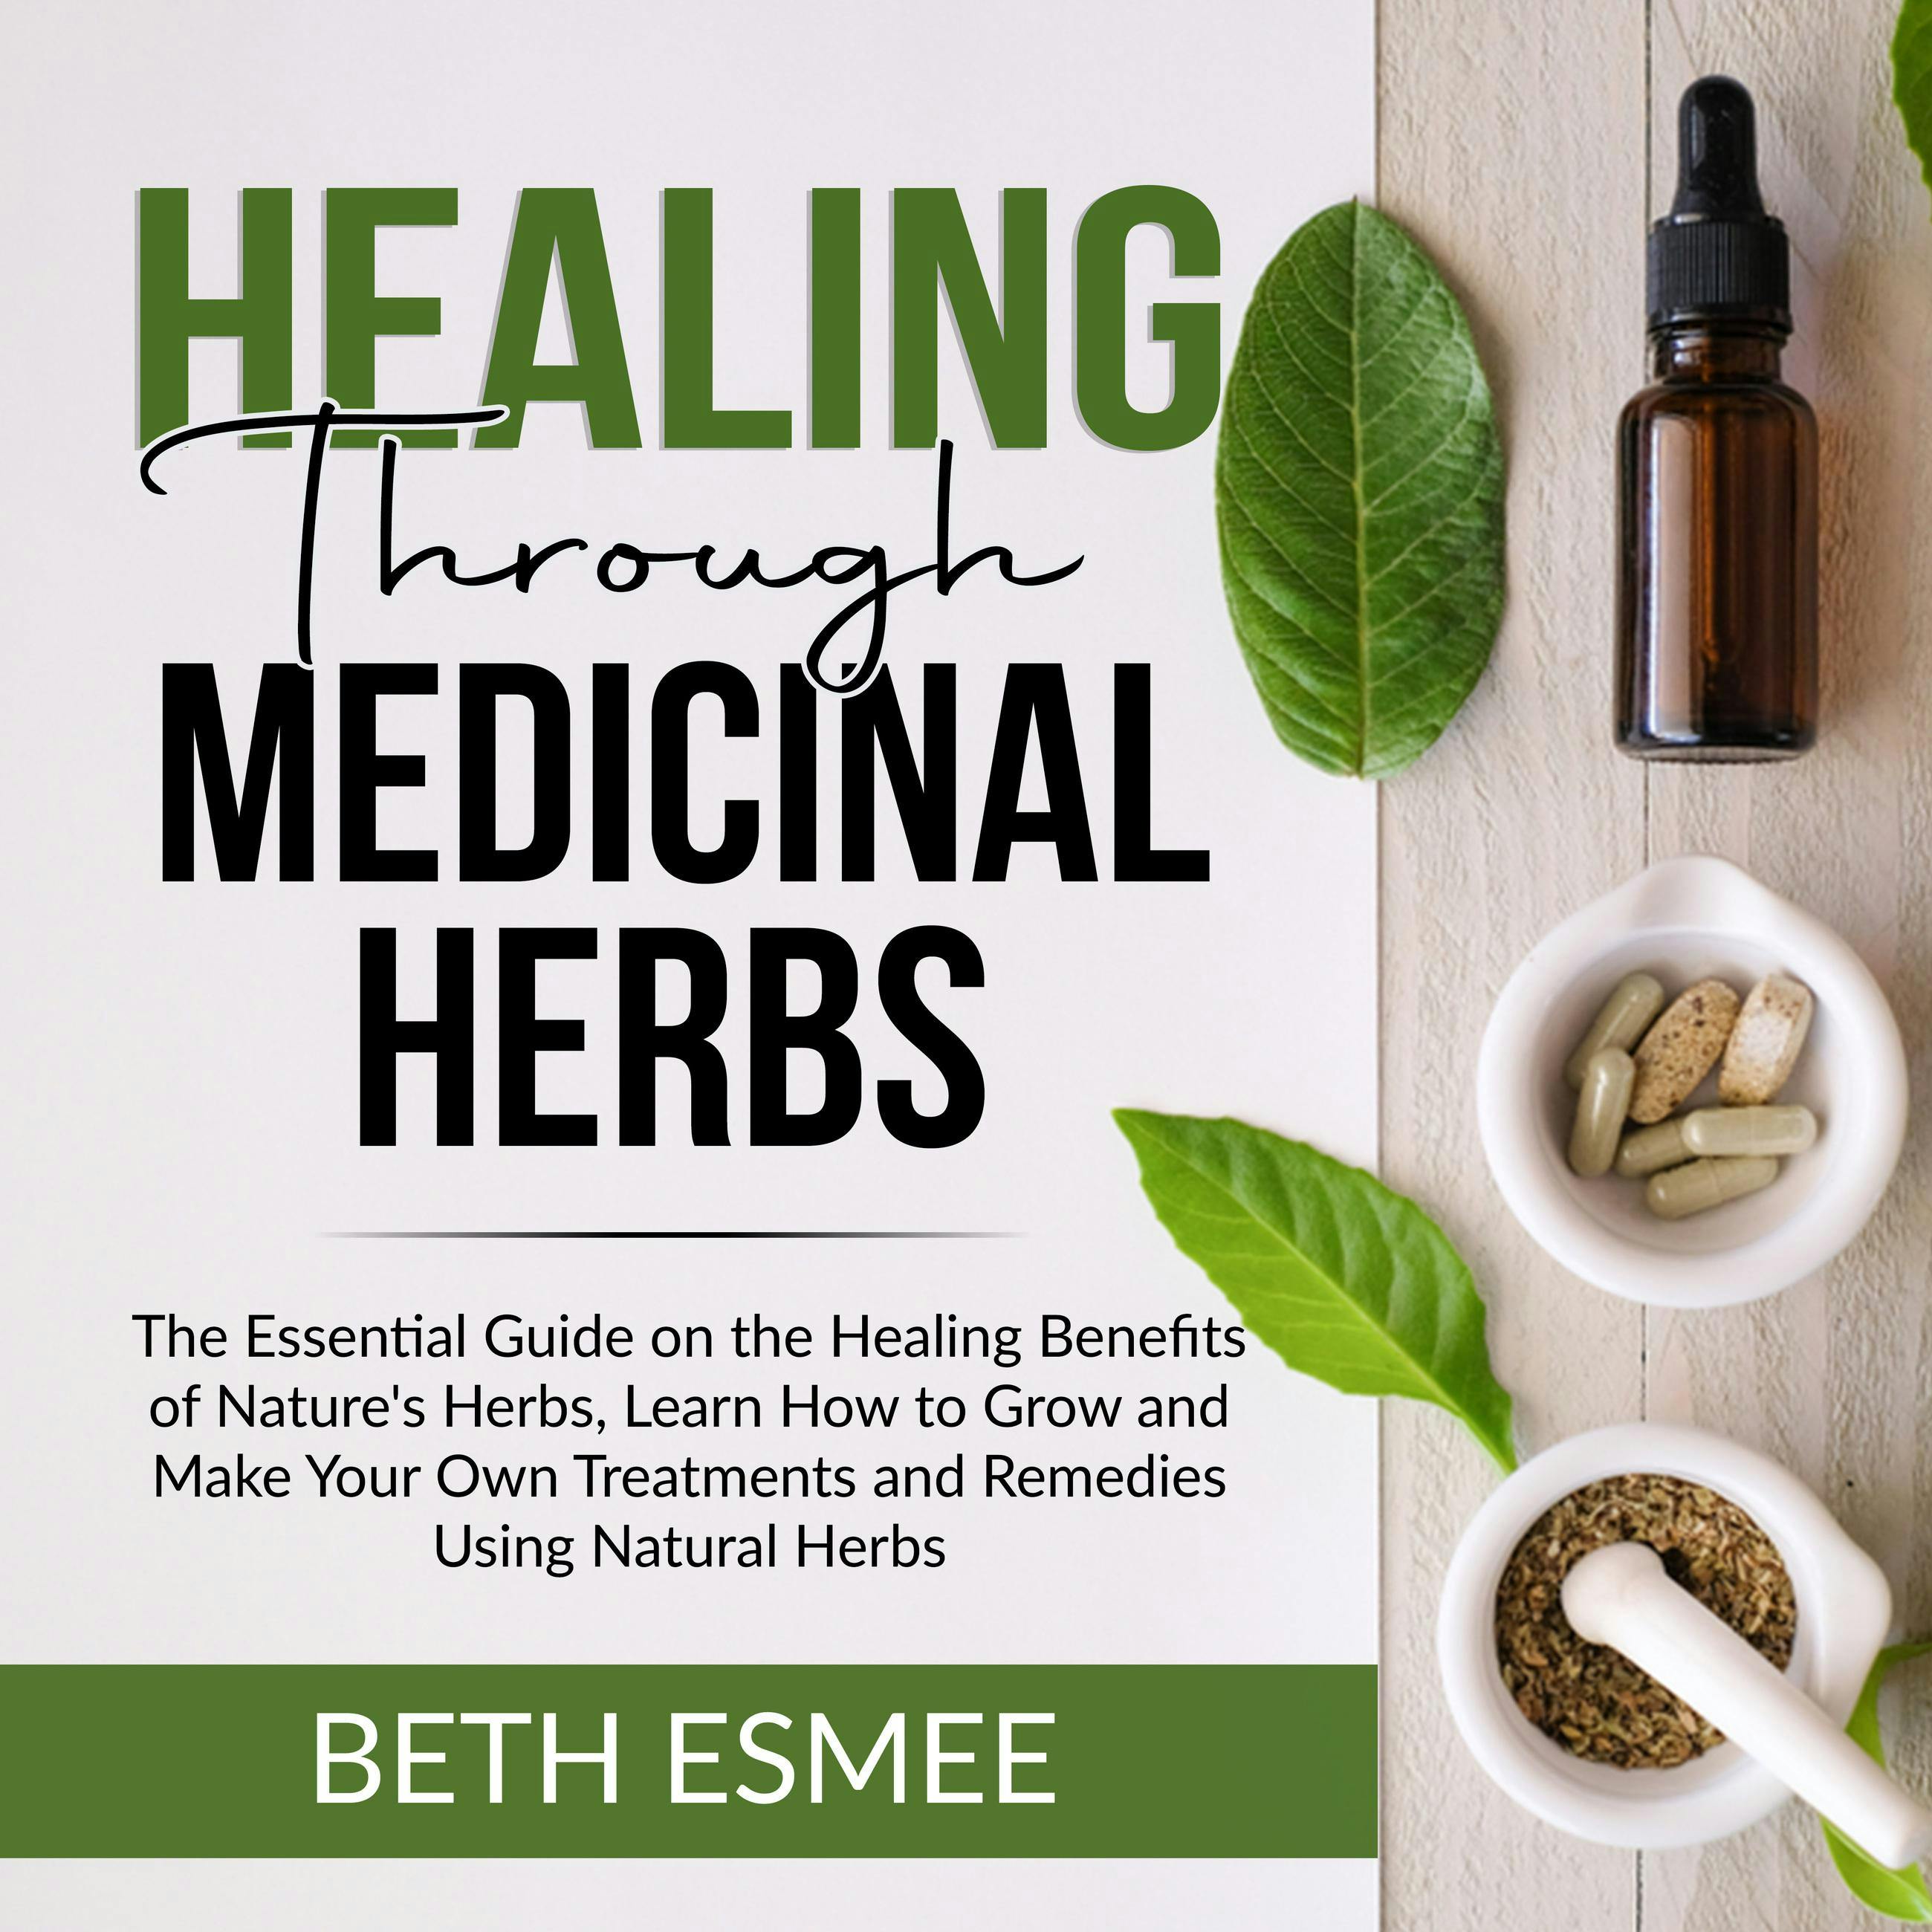 Healing Through Medicinal Herbs: The Essential Guide on the Healing Benefits of Nature's Herbs, Learn How to Grow and Make Your Own Treatments and Remedies Using Natural Herbs - Beth Esmee